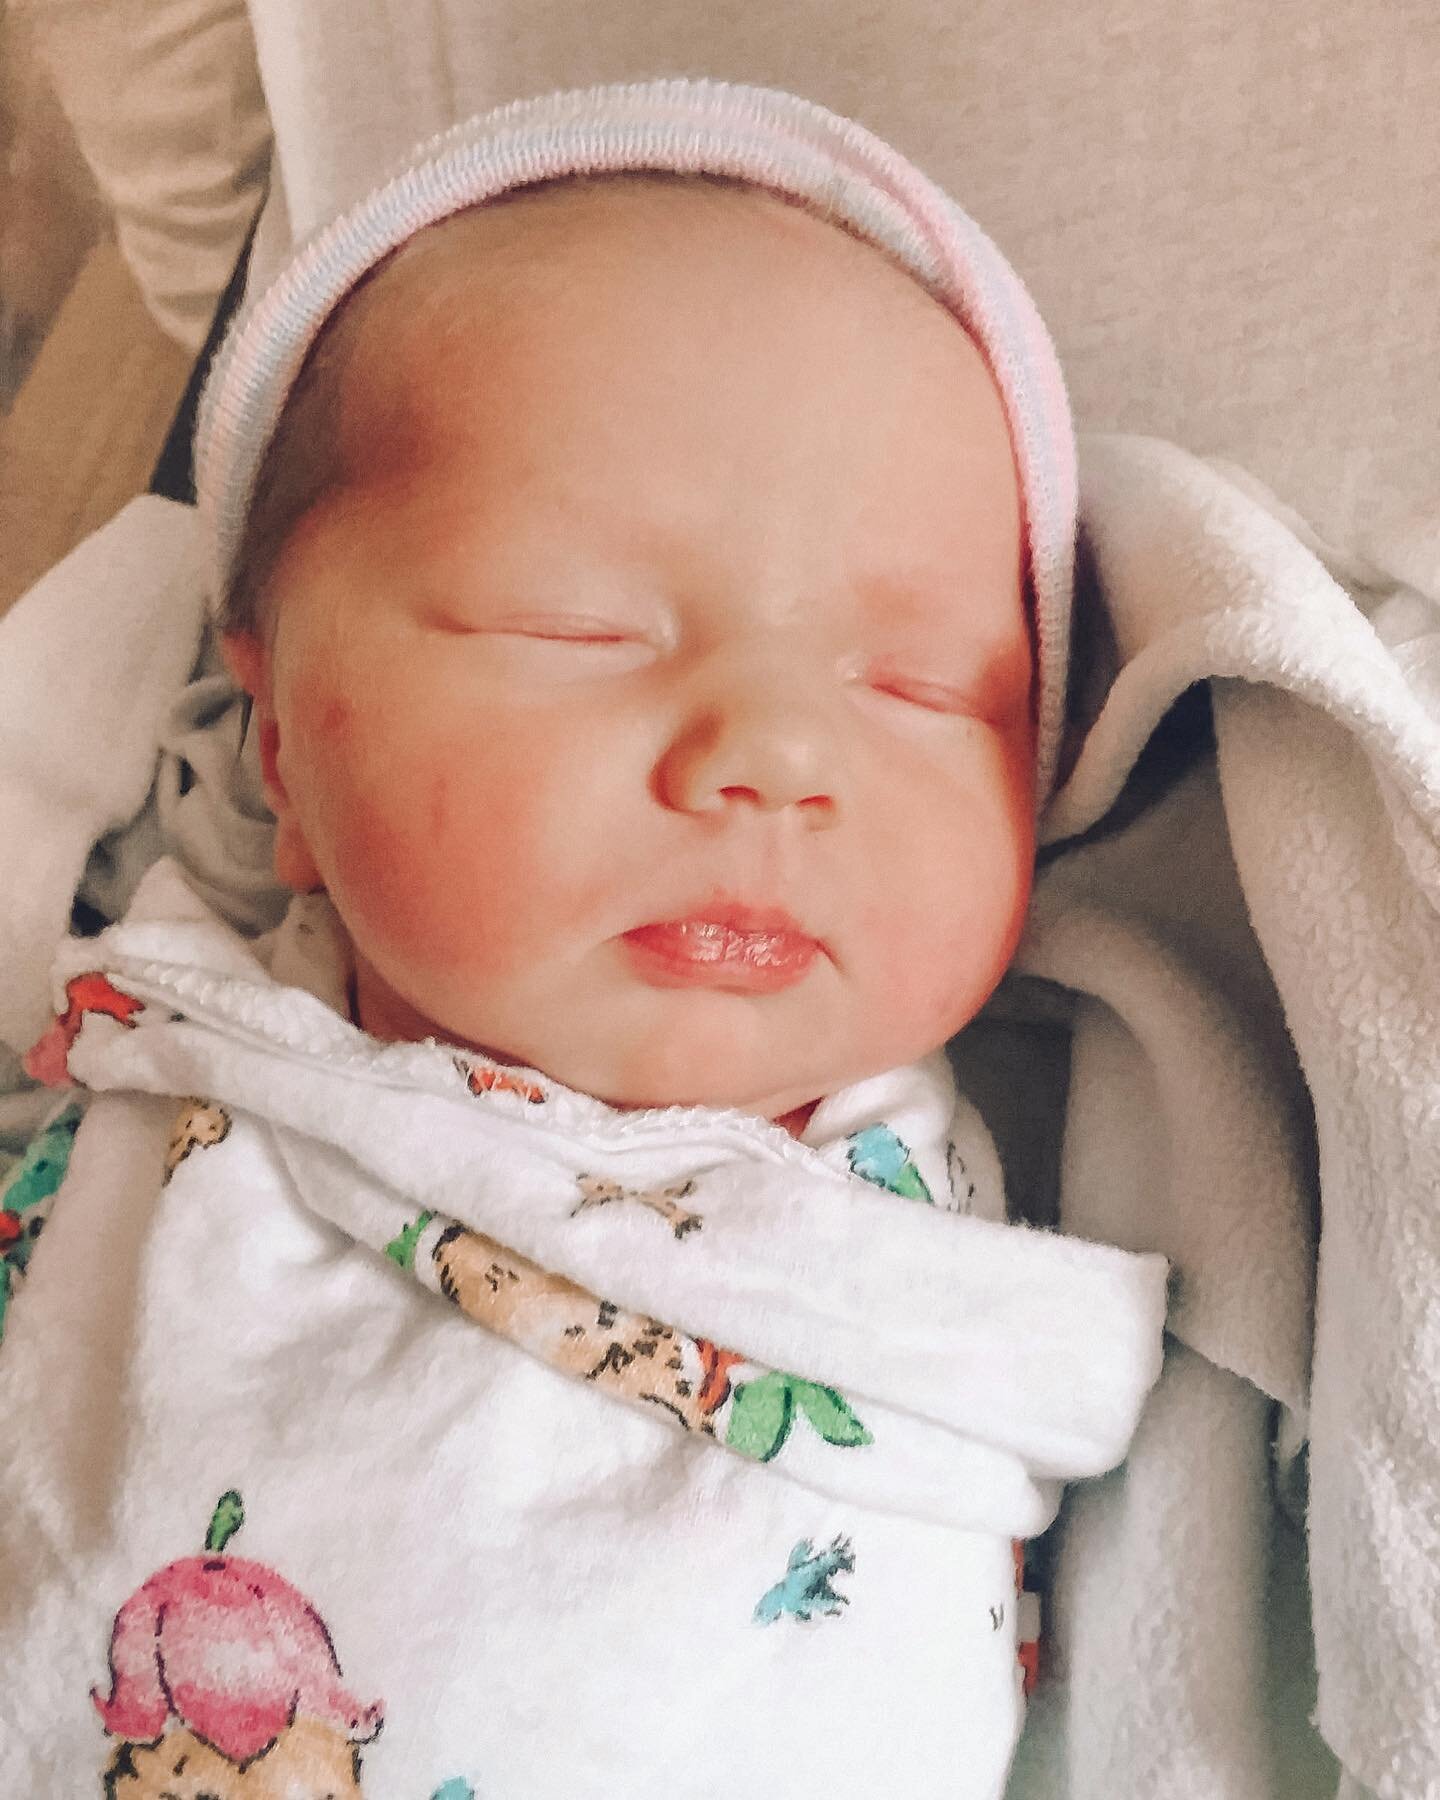 We&rsquo;re a little late on this announcement, but Dr. Tamas had her baby!! 🎉🎊

Evelina &ldquo;Evie&rdquo; Aliz Tamas was born April 27th, 2022. She has already grown so much! We all adore her and that poofy hair 😍💕